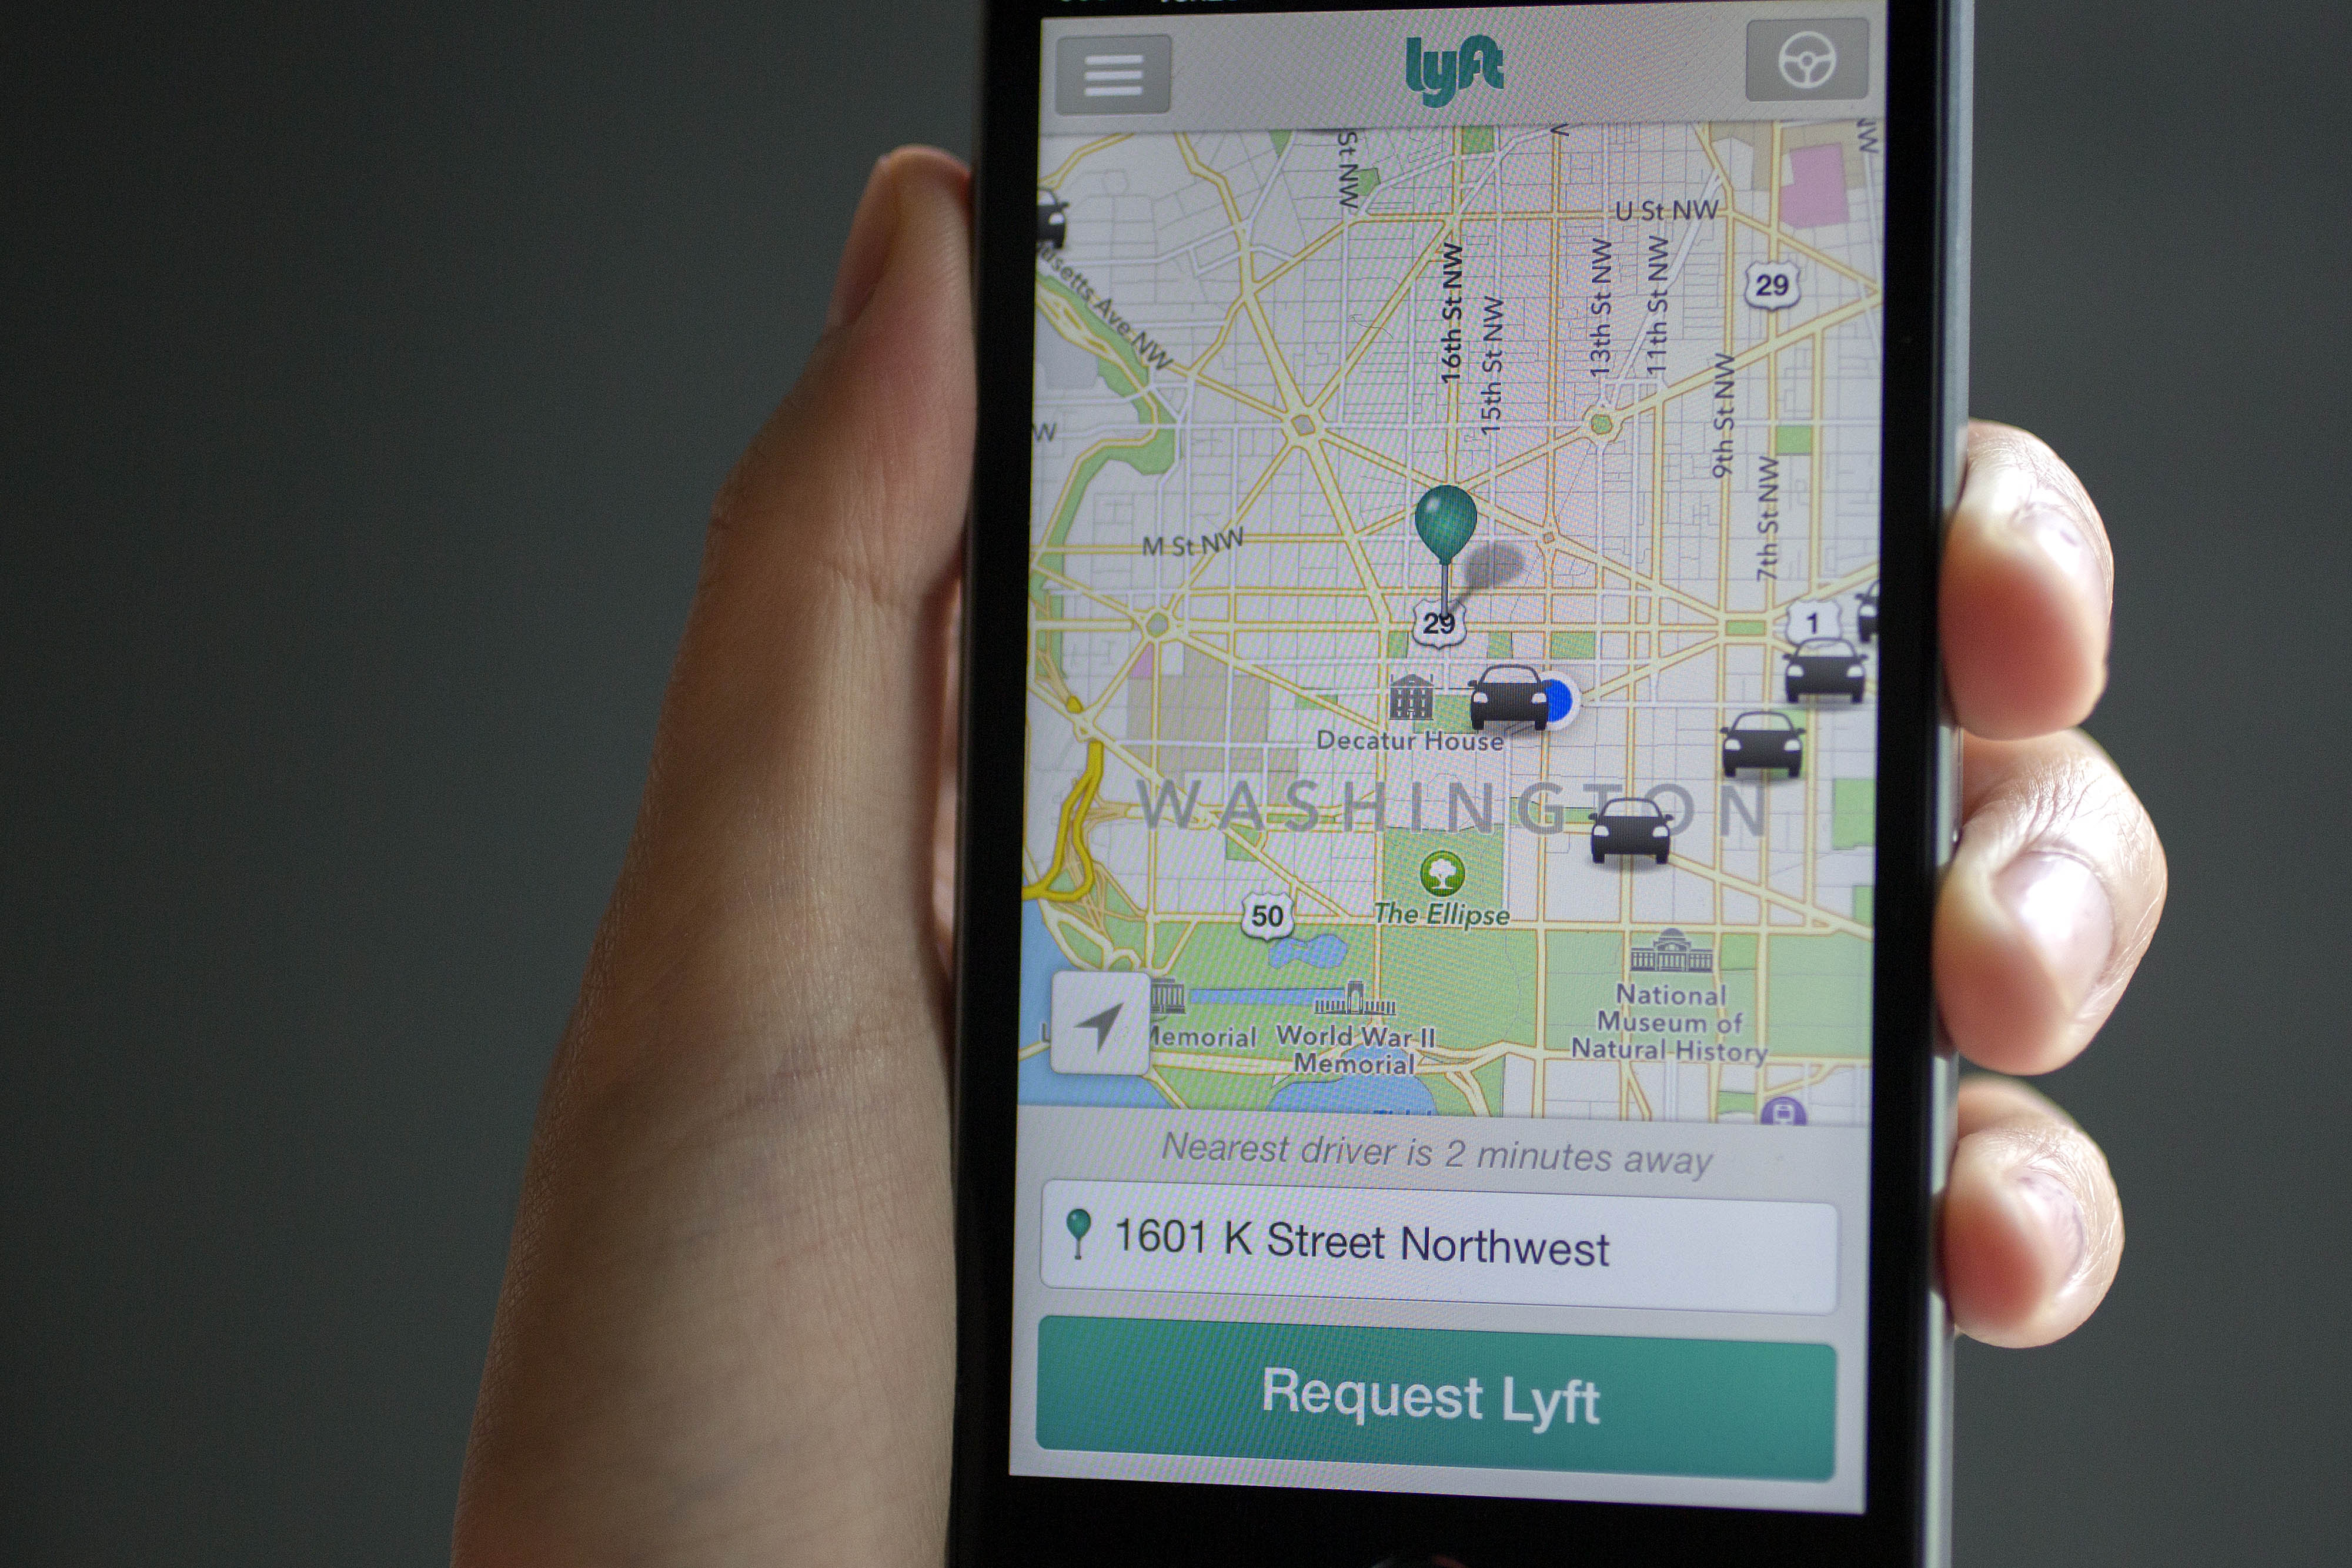 The Lyft Inc. application (app) is displayed for an arranged photograph in Washington, D.C., U.S., on July 9, 2014. (Andrew Harrer/Bloomberg via Getty Images)